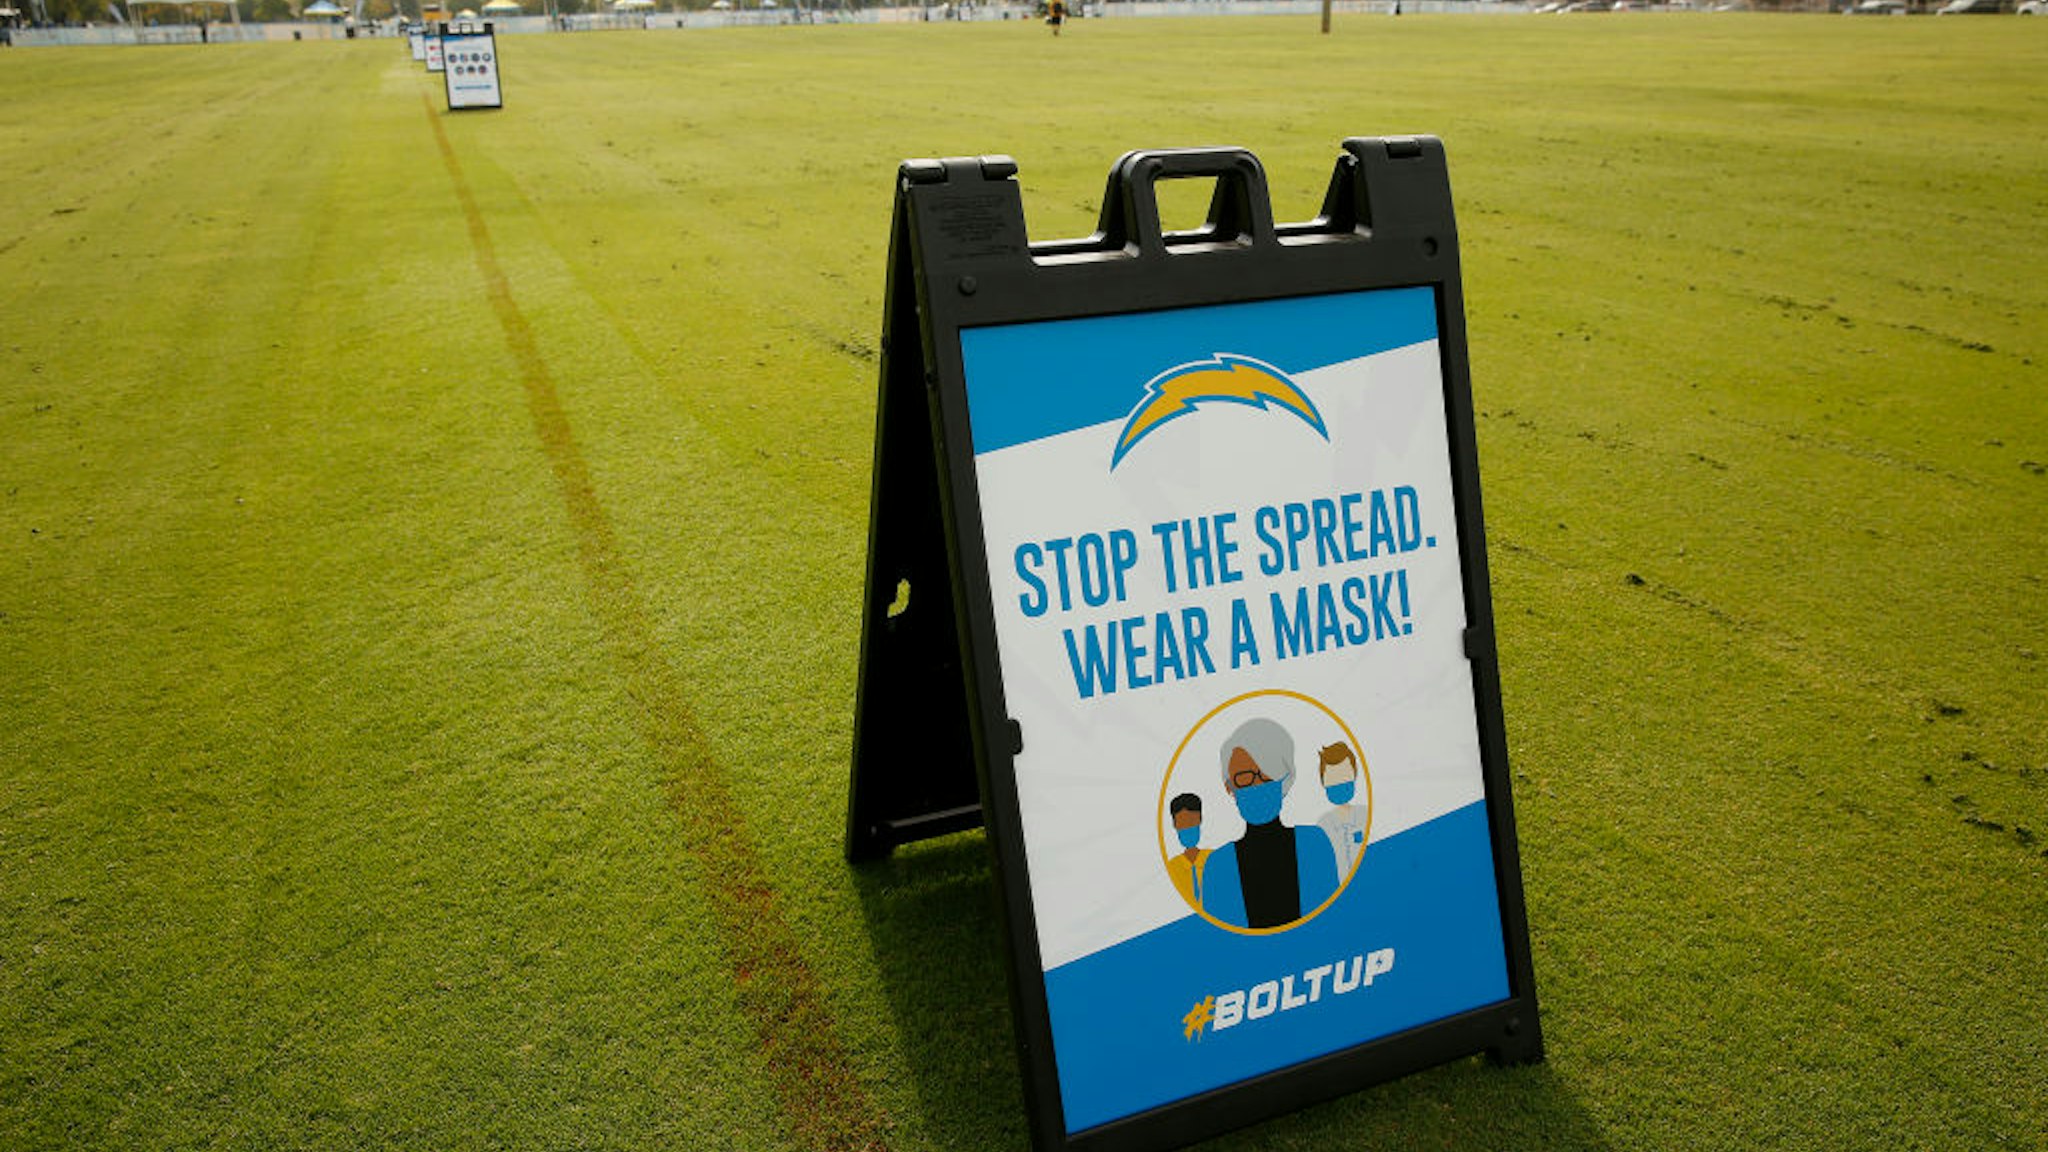 Covid-19 Reminders as the Los Angeles Chargers conduct practice at the Hammett Sports Complex in Costa Mesa on Monday August 17, 2020 in preparation for the 2020 National Football League season.